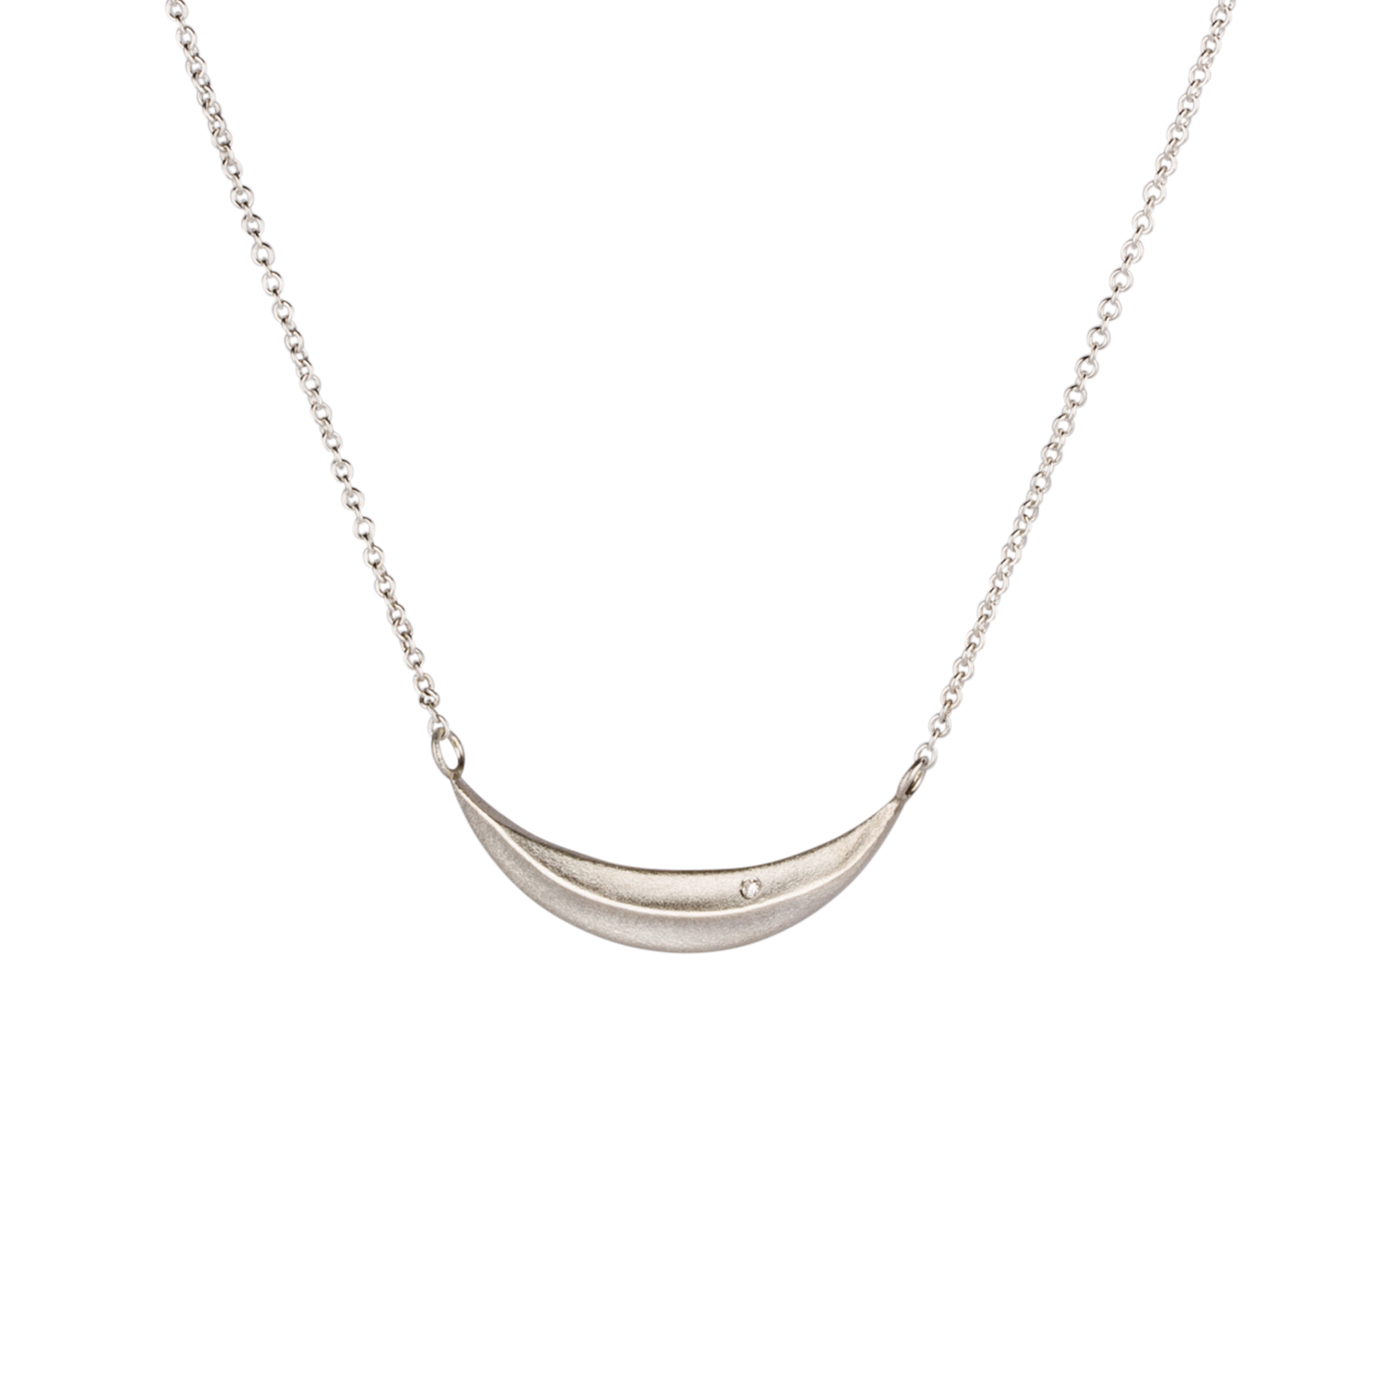 Sterling Silver and Diamond Wisp Necklace by Corey Egan on a white background alternate view